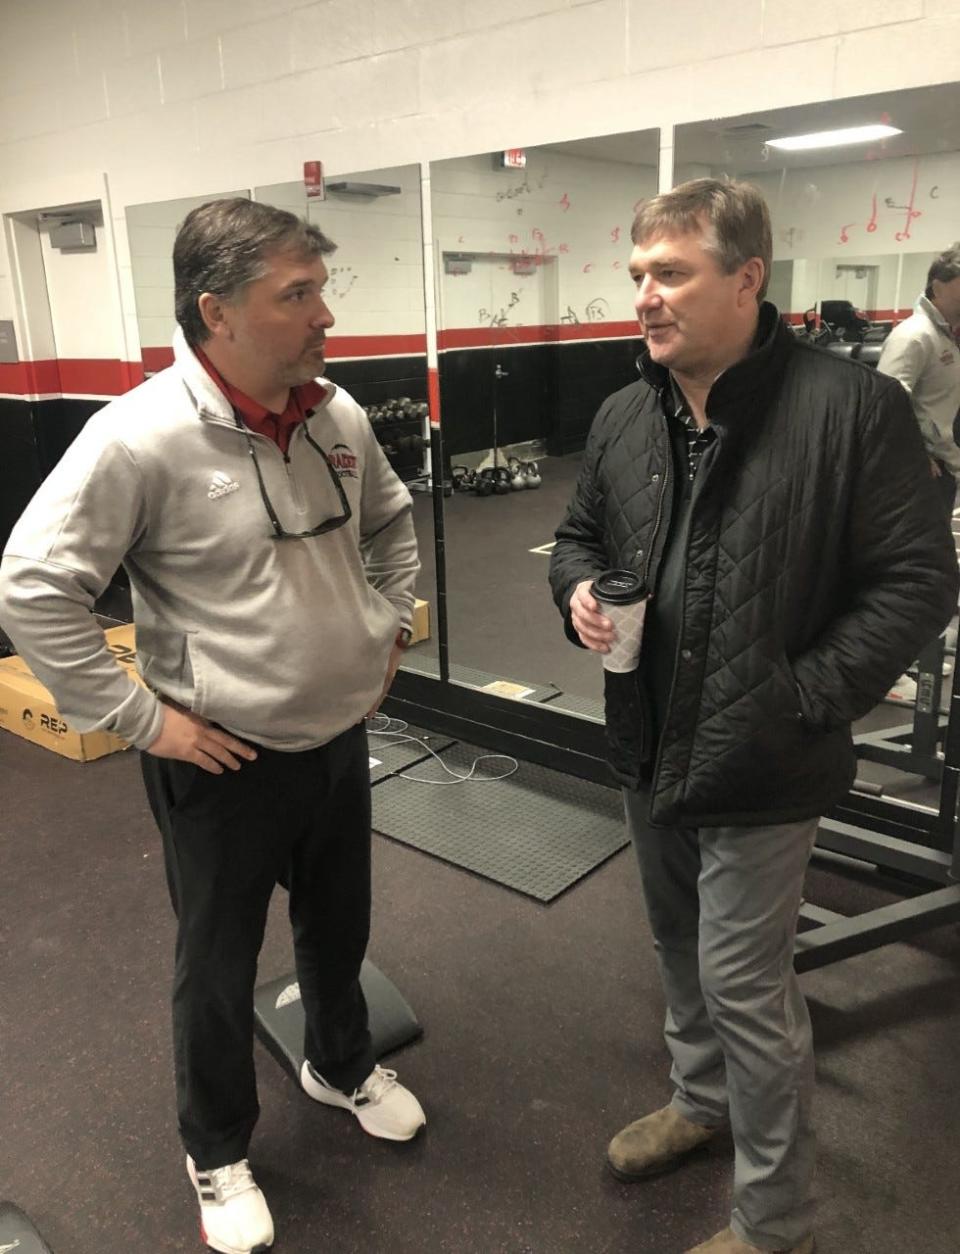 UGA coach Kirby Smart (right) talks with Savannah Christian coach Baker Woodward in the SCPS weight room during a recruiting visit Tuesday.